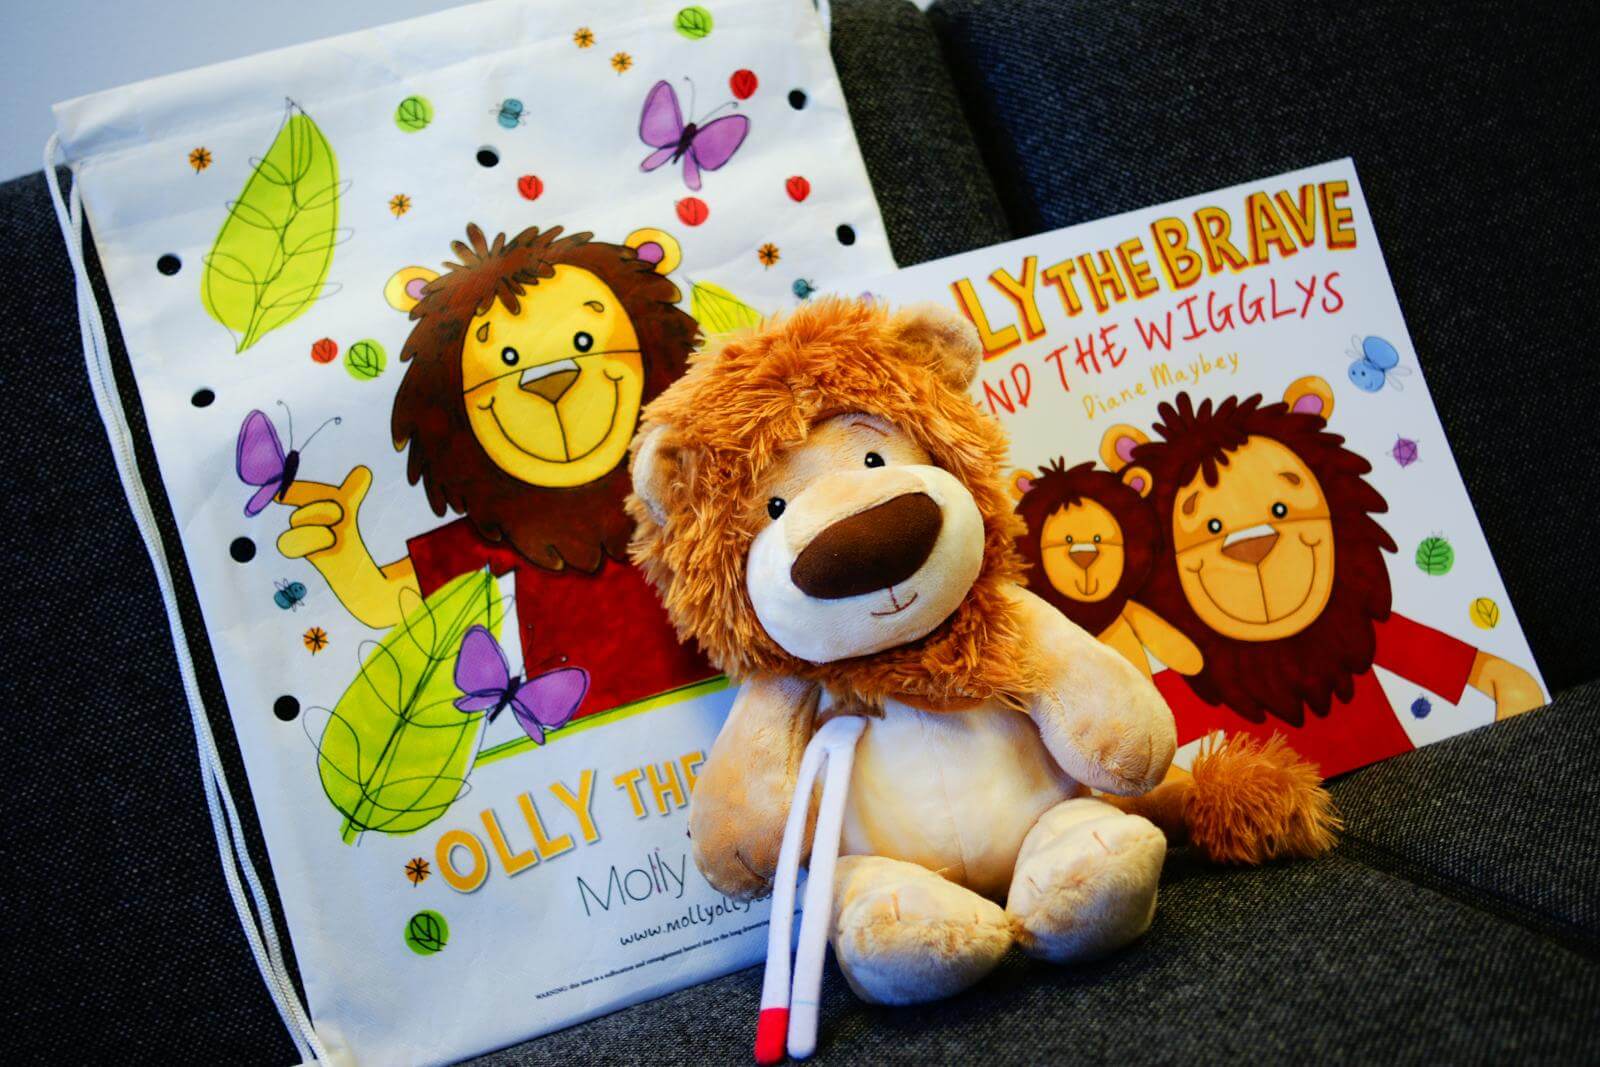 Olly the Brave from Molly Olly's Wishes is made to help children who have had chemotherapy or a Central/Hickman Line